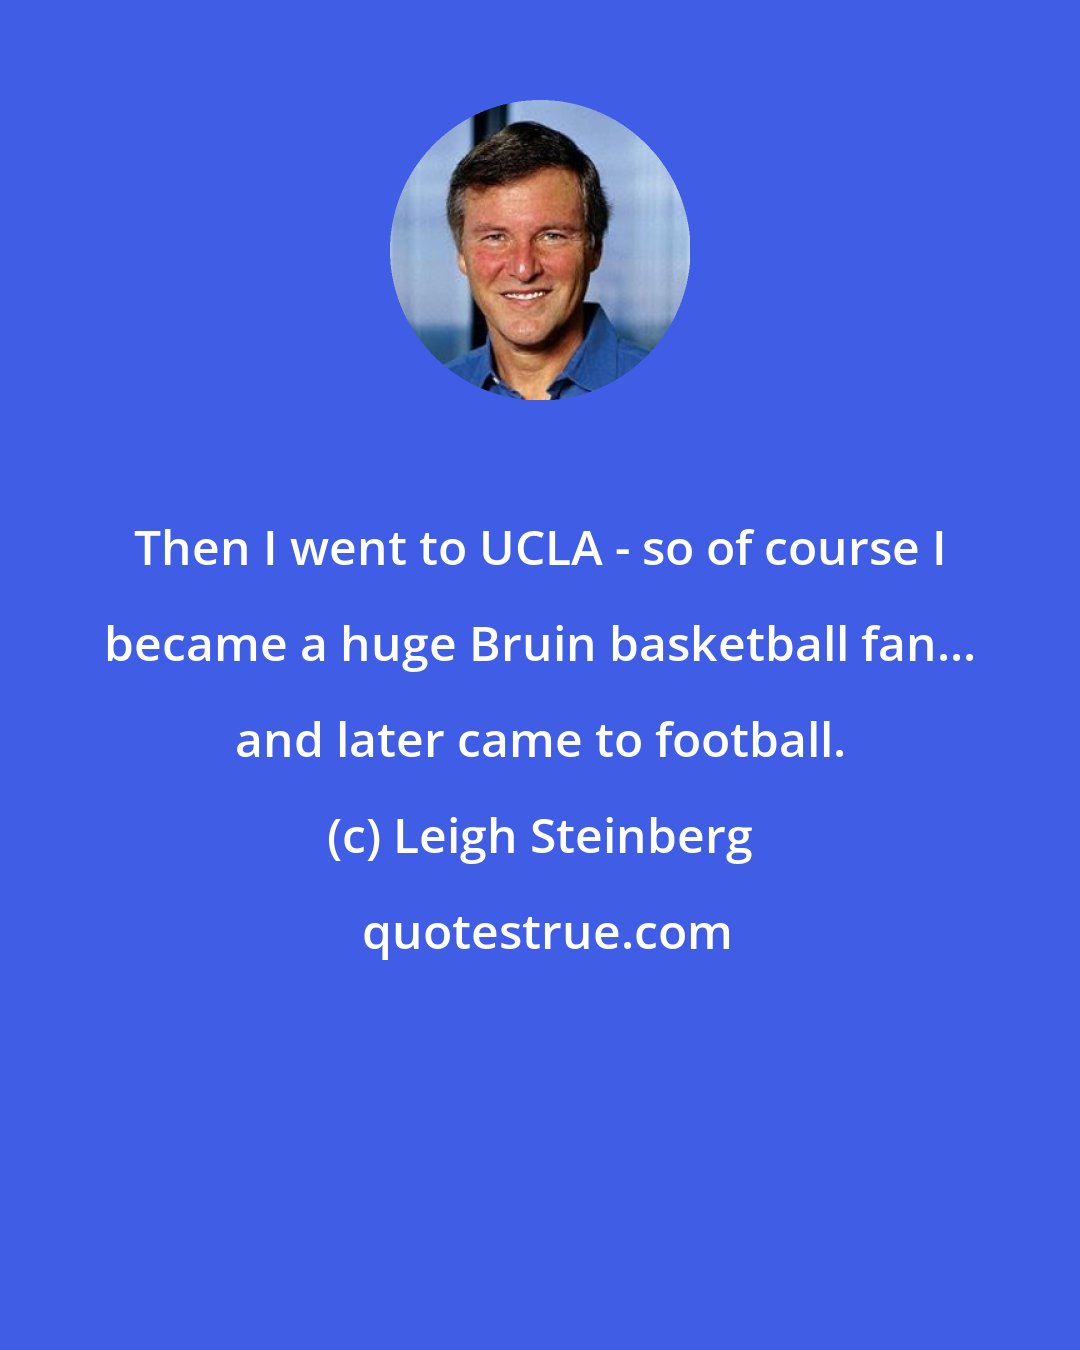 Leigh Steinberg: Then I went to UCLA - so of course I became a huge Bruin basketball fan... and later came to football.